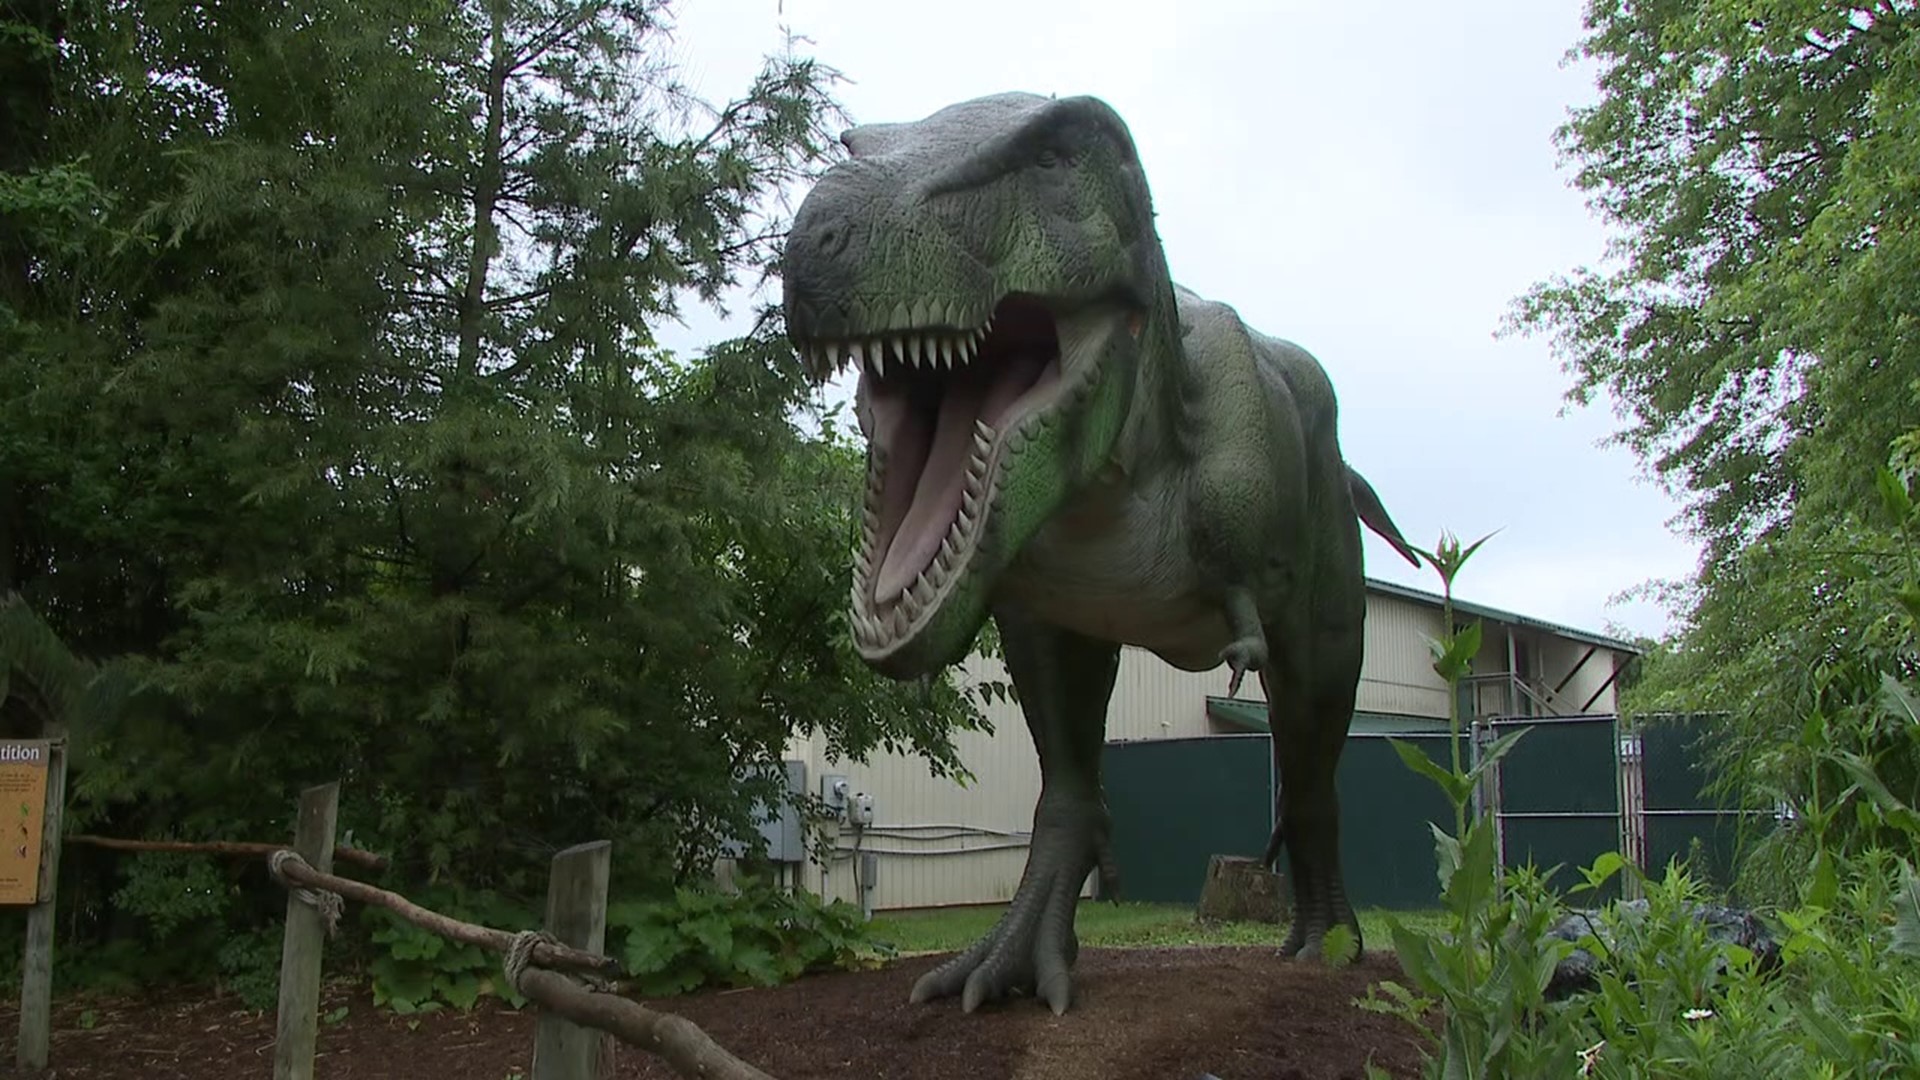 This weekend is Dino Days at Clyde Peeling's Reptiland near Allenwood.